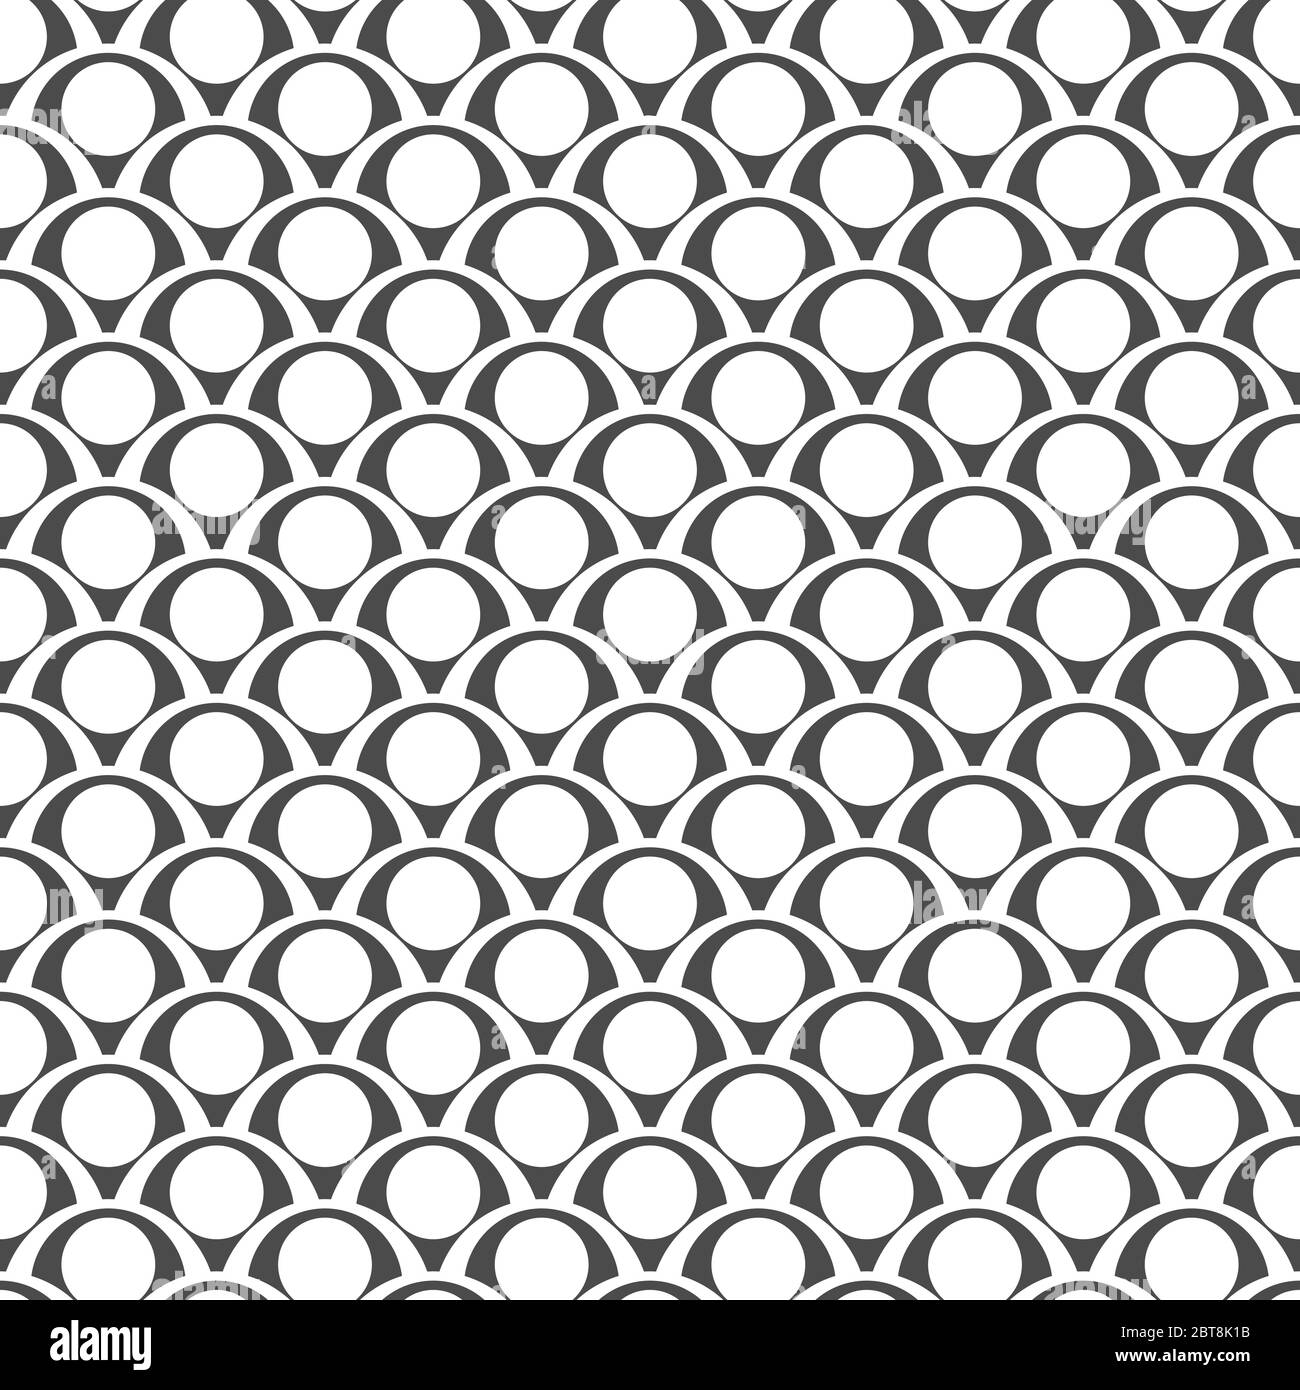 Seamles black and white pattern with circles. Mermaid tail blue backround. Vector flat illustration Stock Vector